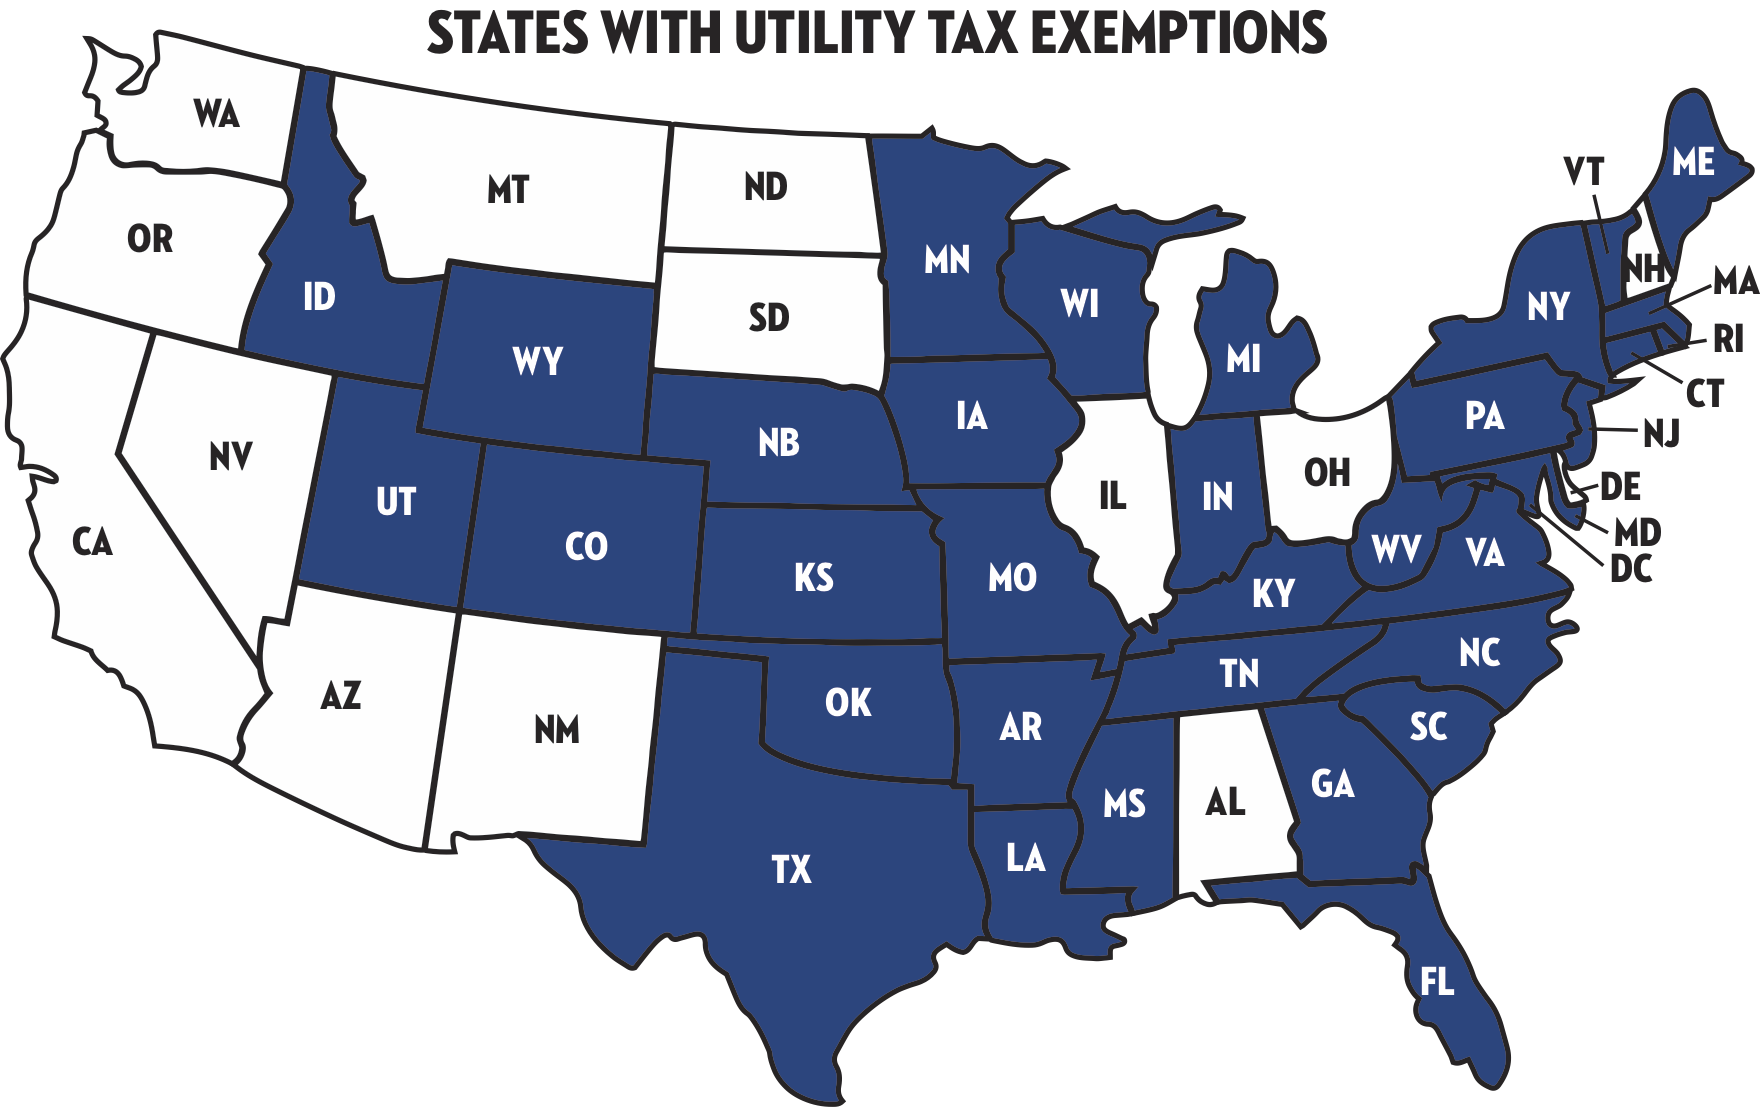 state-tax-exemption-map-national-utility-solutions